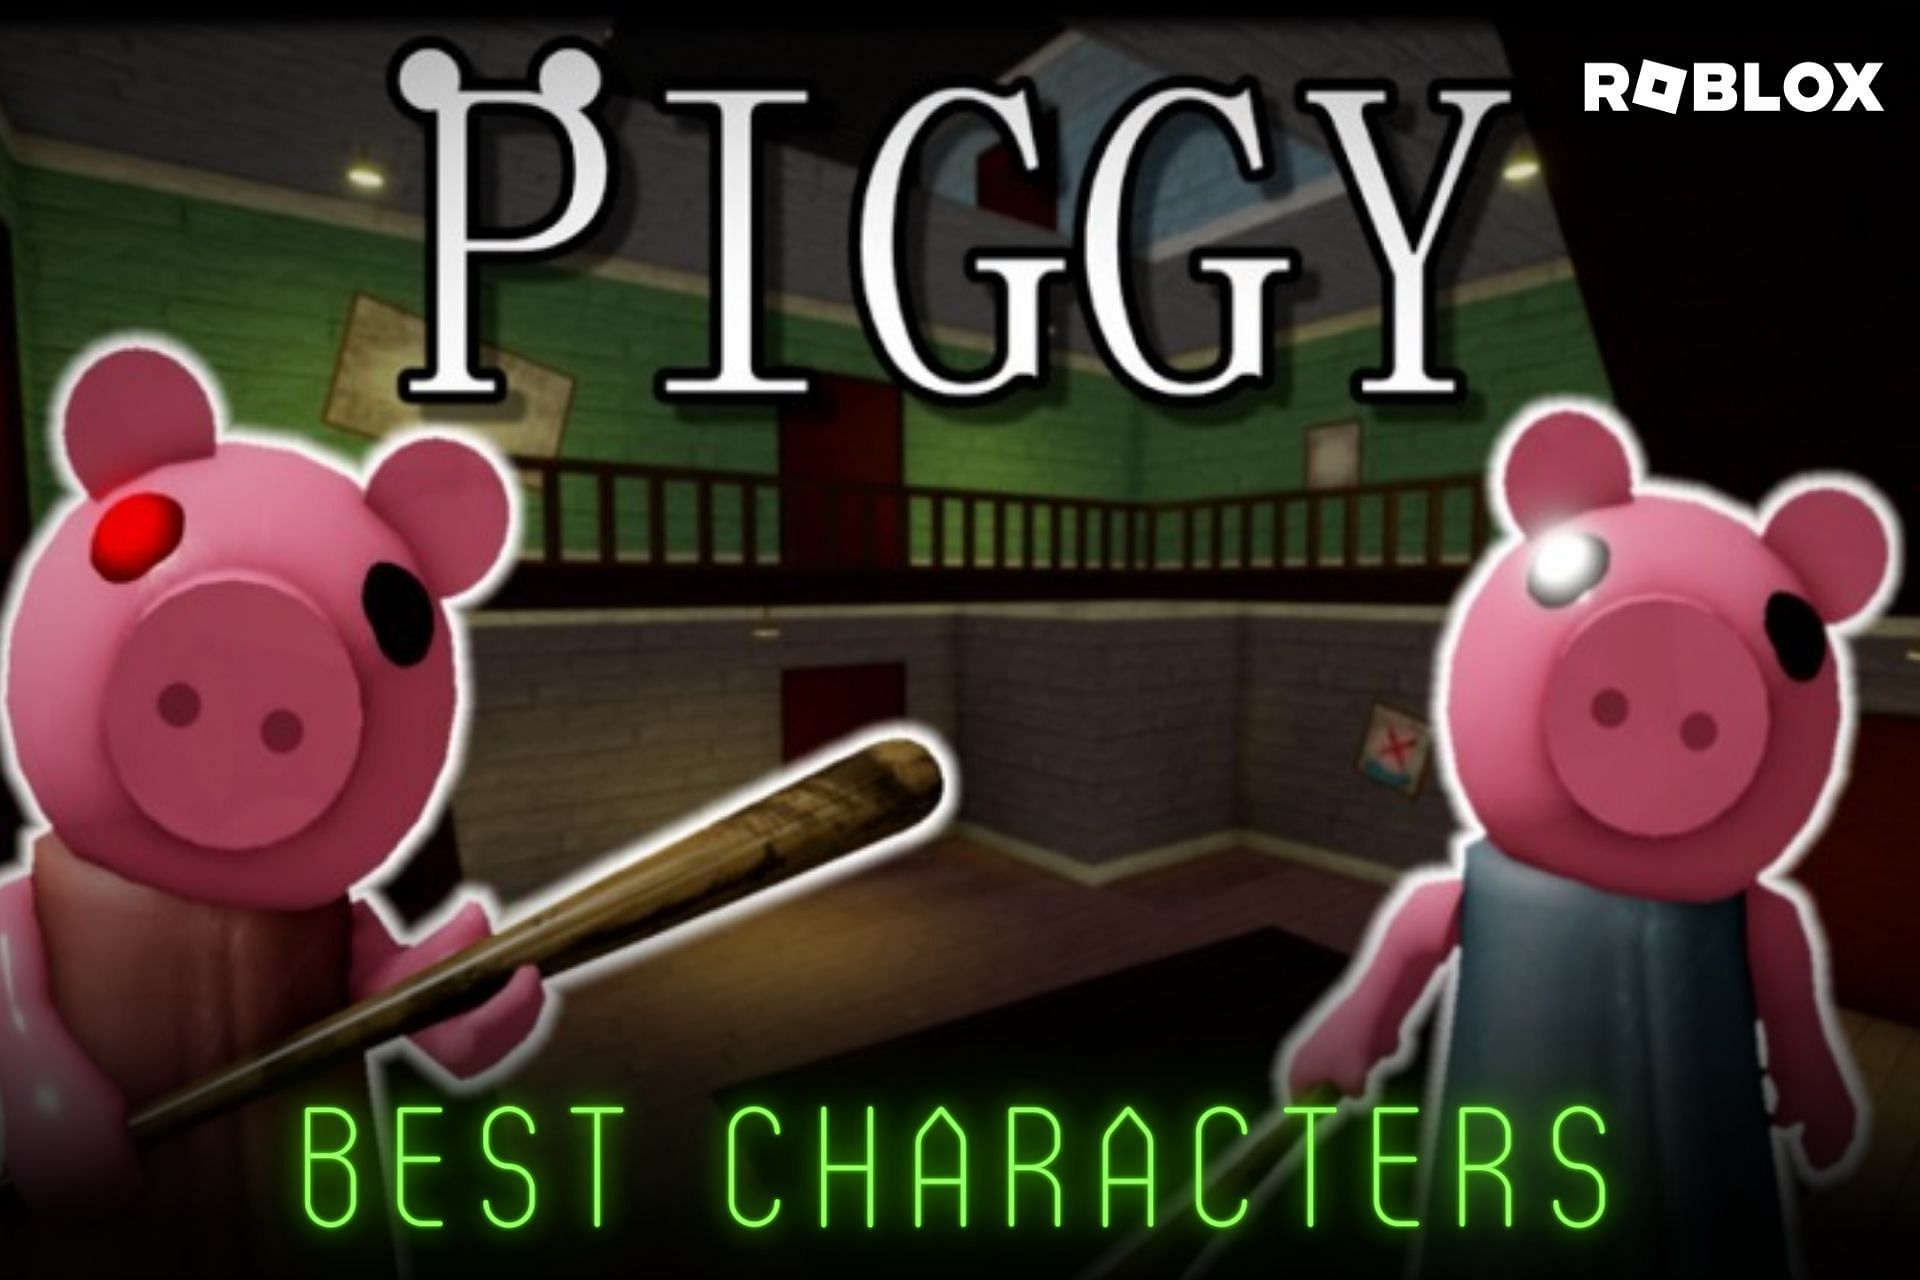 Best characters in Roblox Piggy (Image via Roblox) 